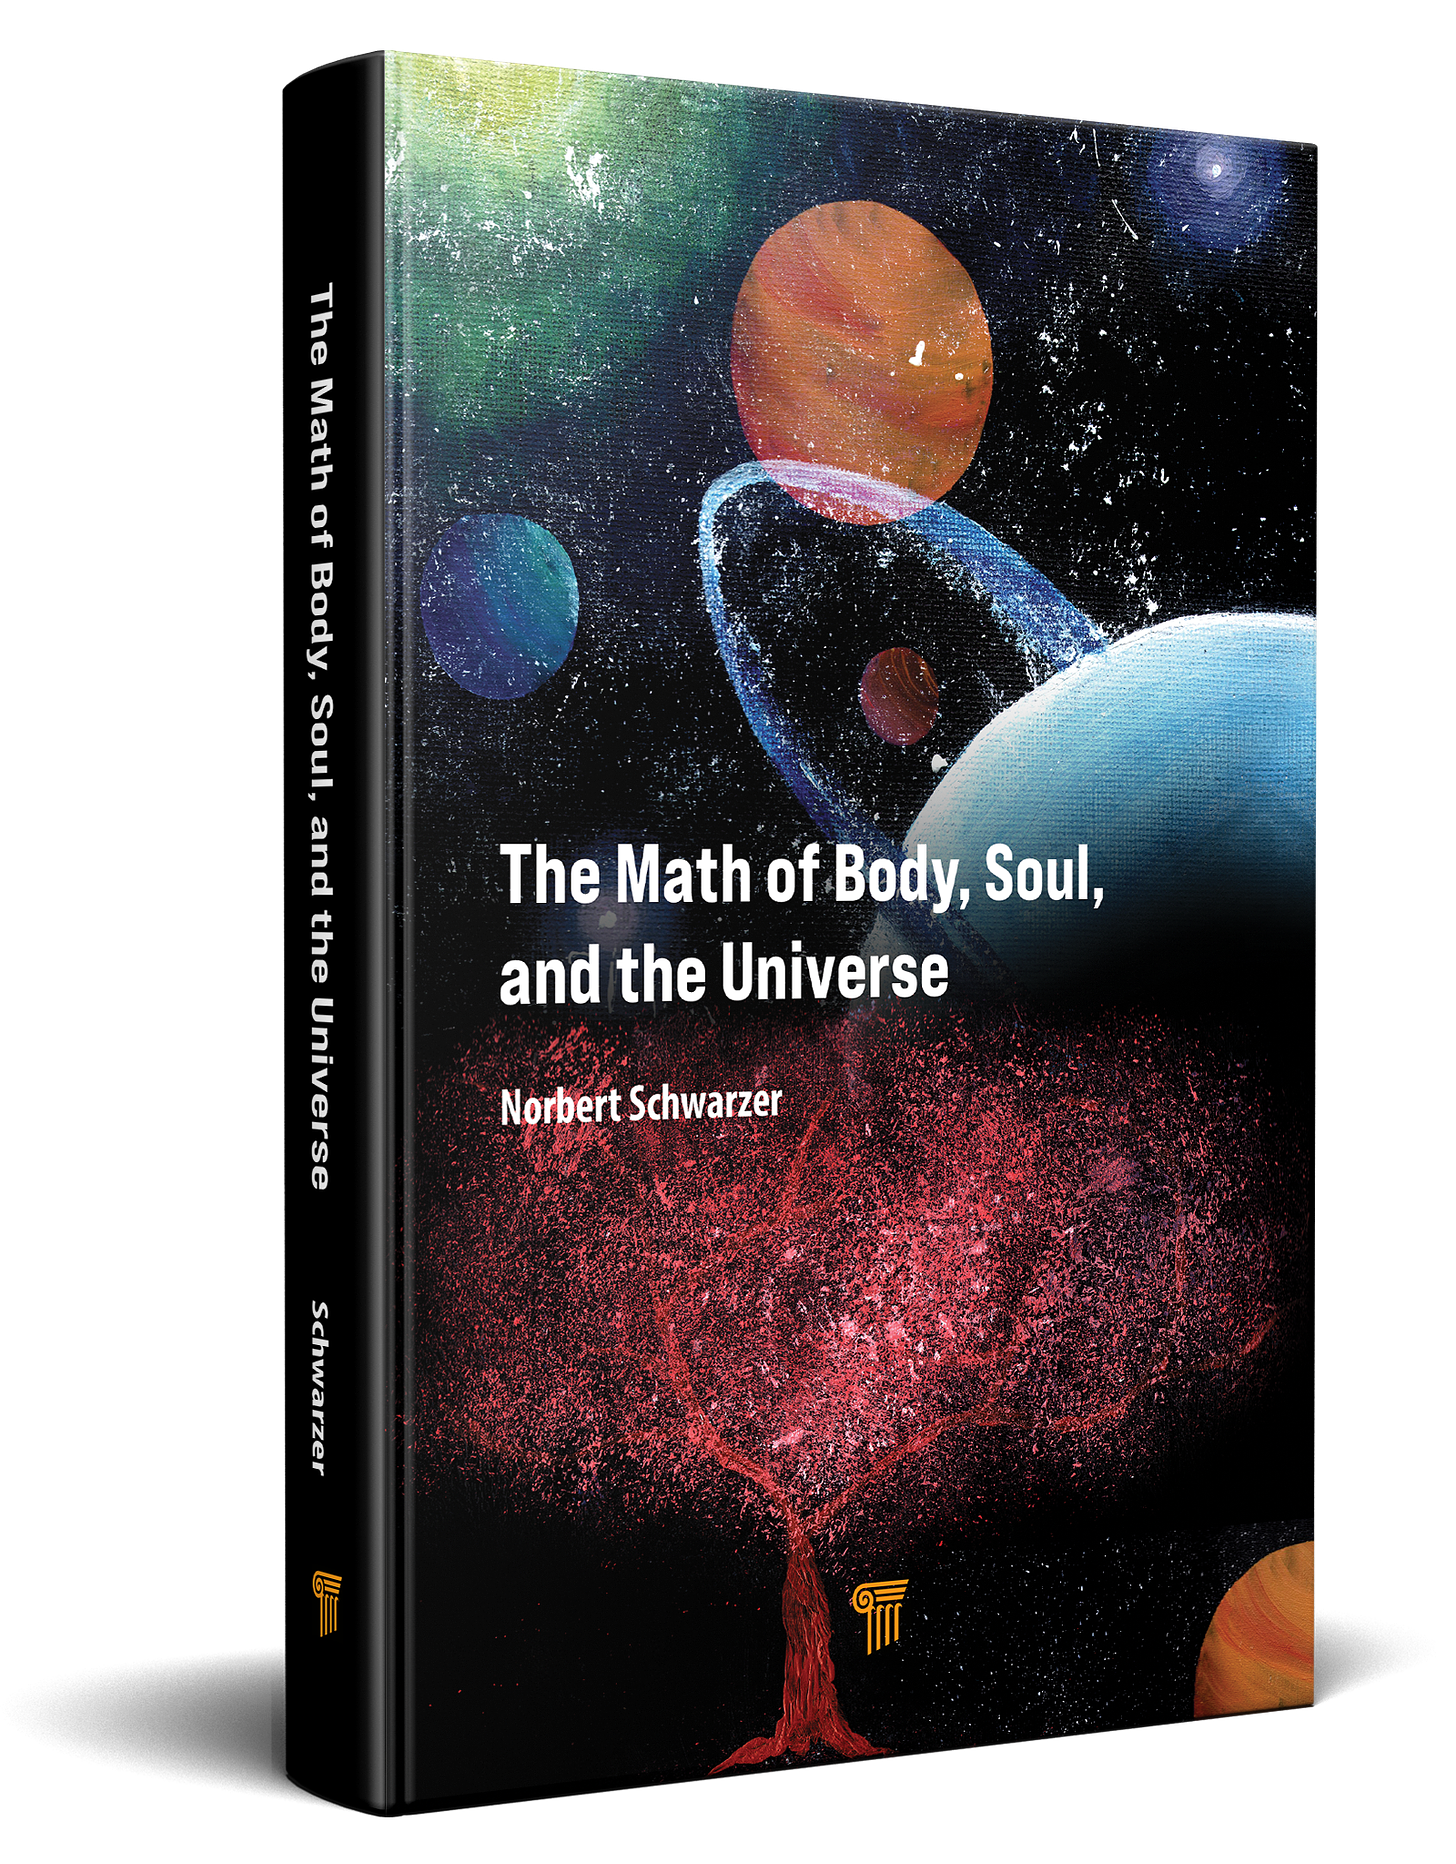 N. Schwarzer: “The Math of Body, Soul and the Universe”, Jenny Stanford Publishing, ISBN 9789814968249